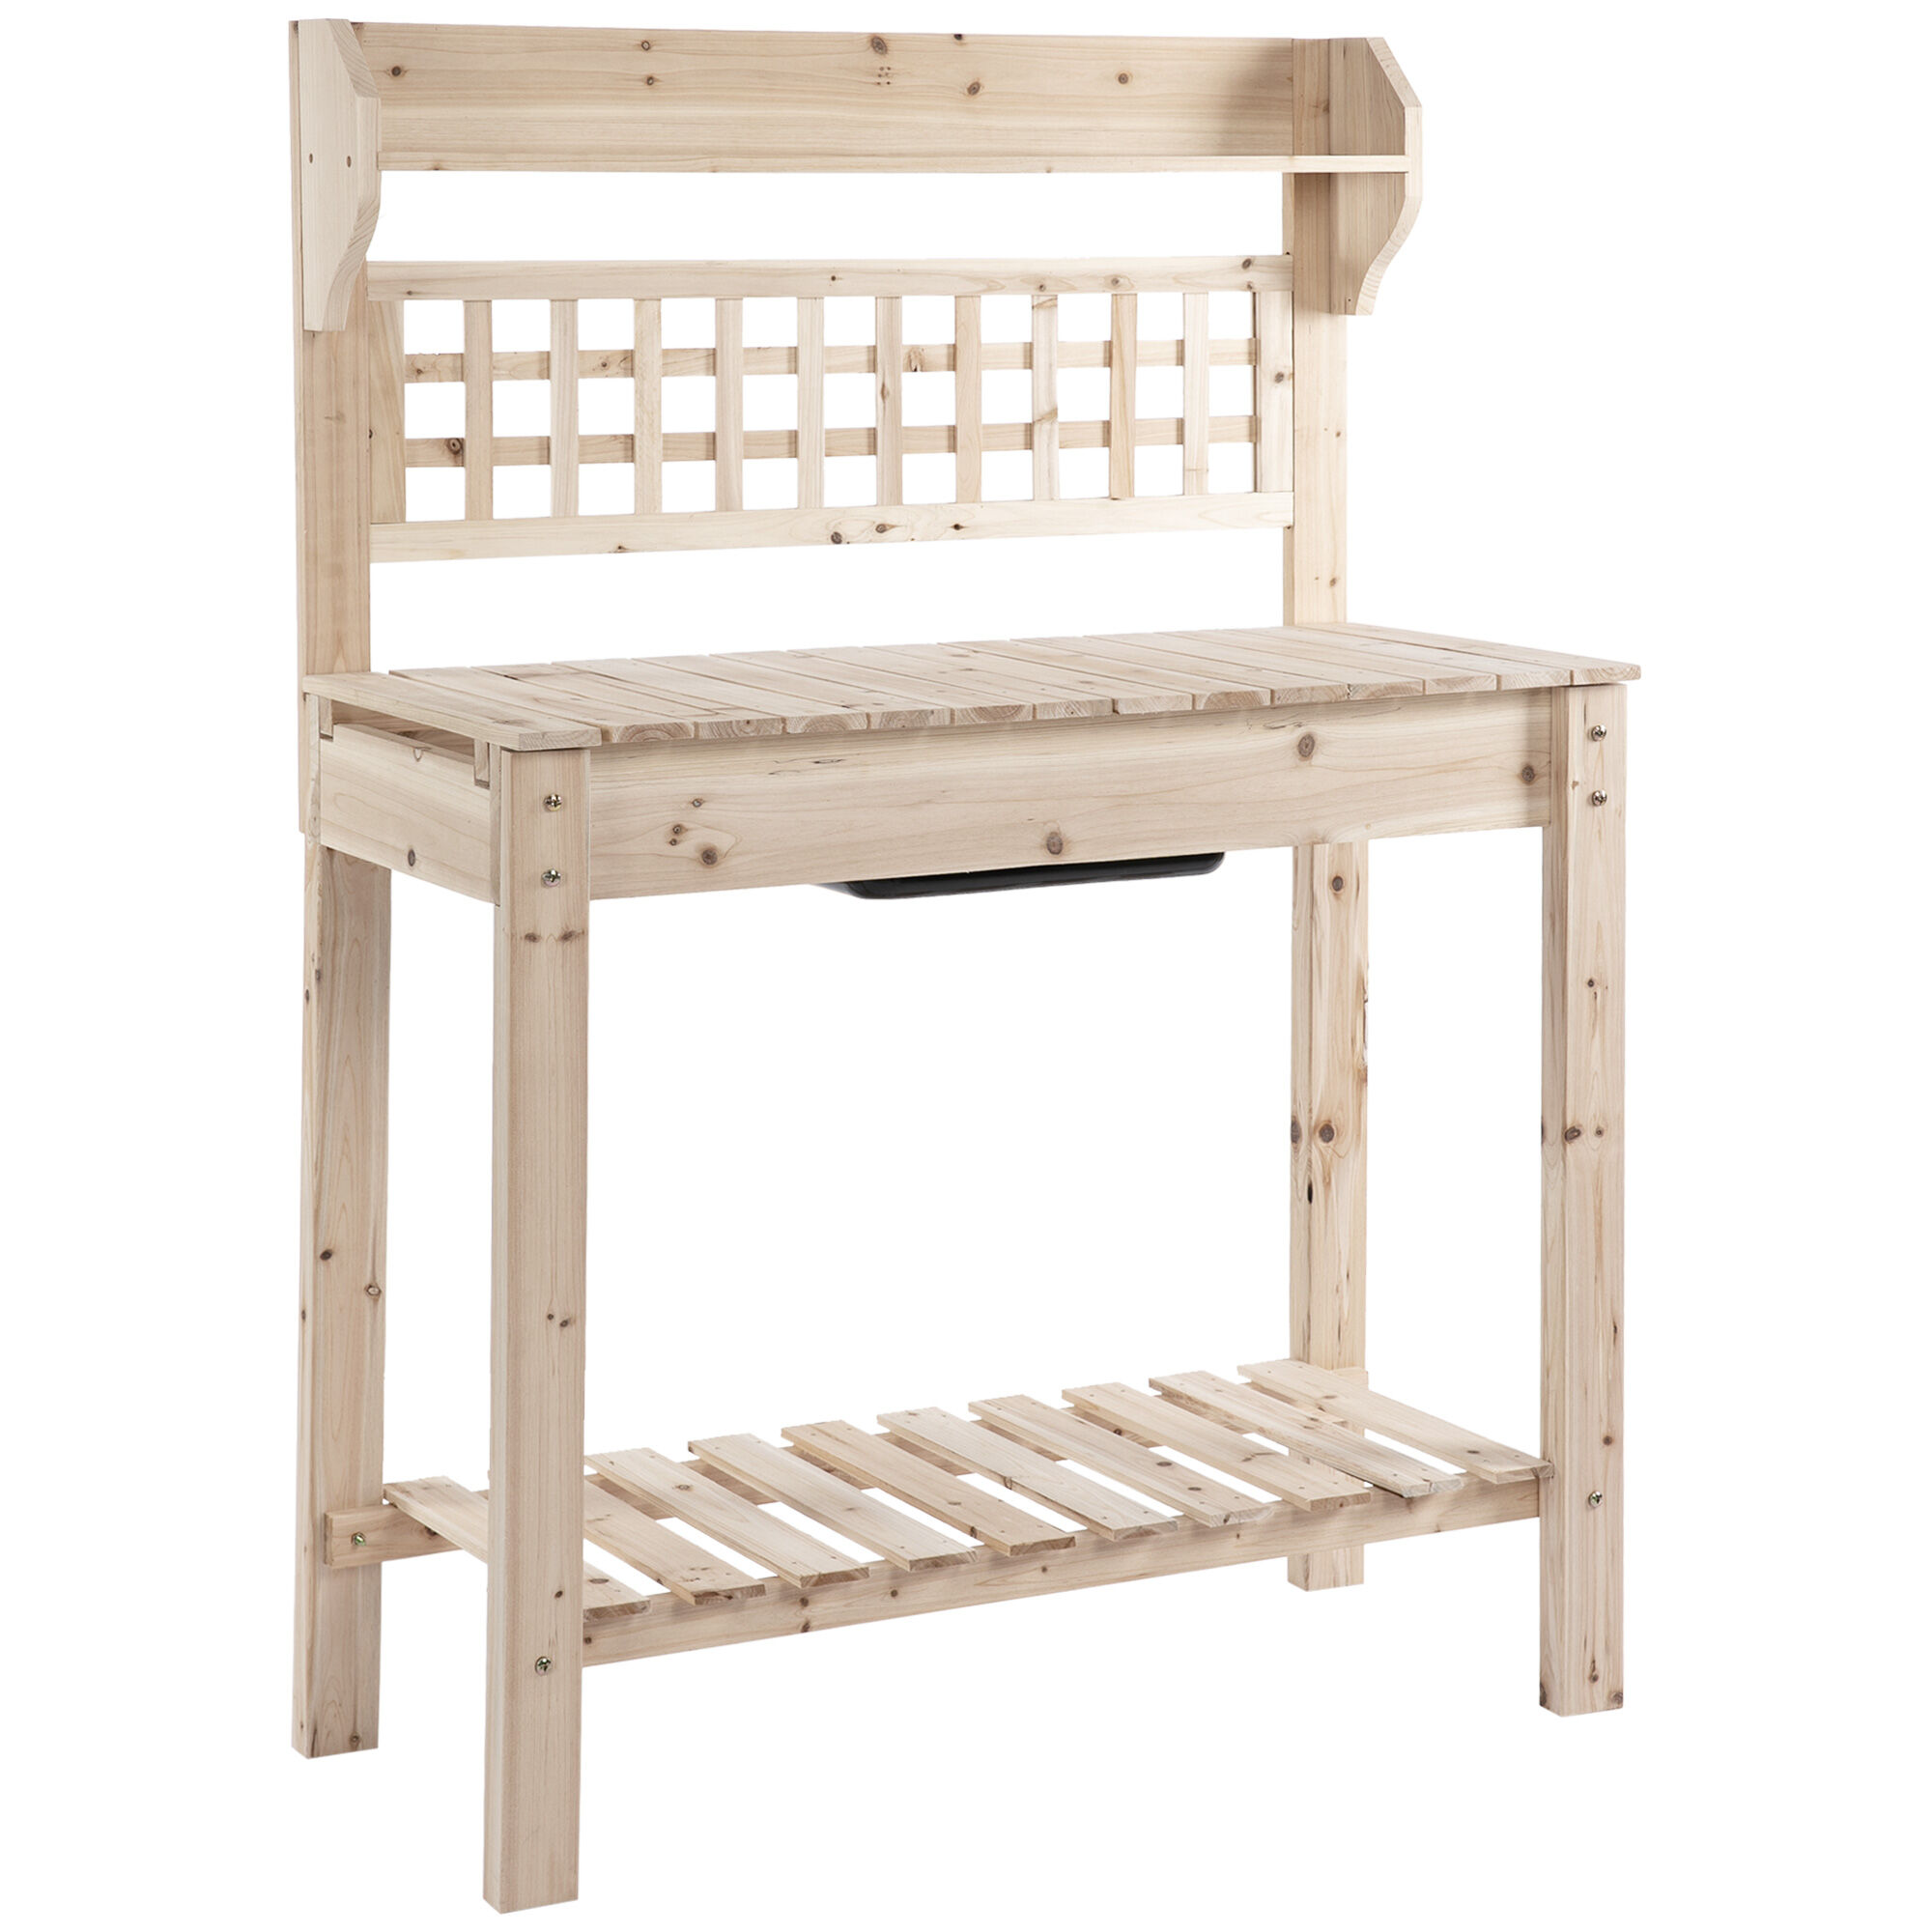 Outsunny Wooden Potting Bench Garden Work Table with Storage Natural Finish   Aosom.com